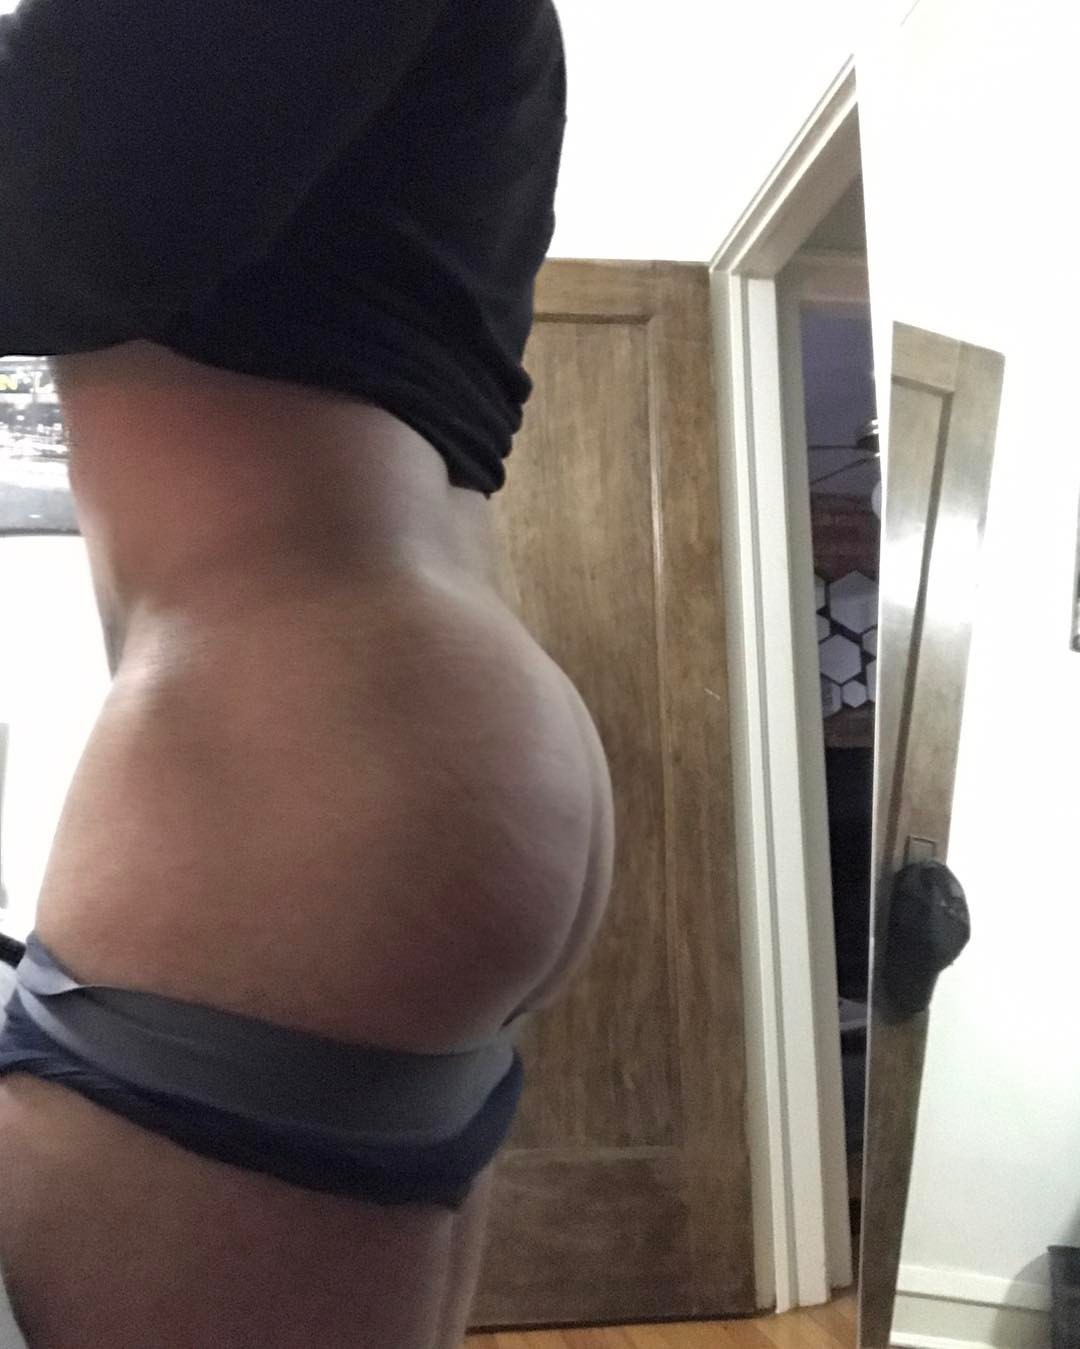 oooc30:  Had to post a face pic before posting another #booty pic, I’m posting